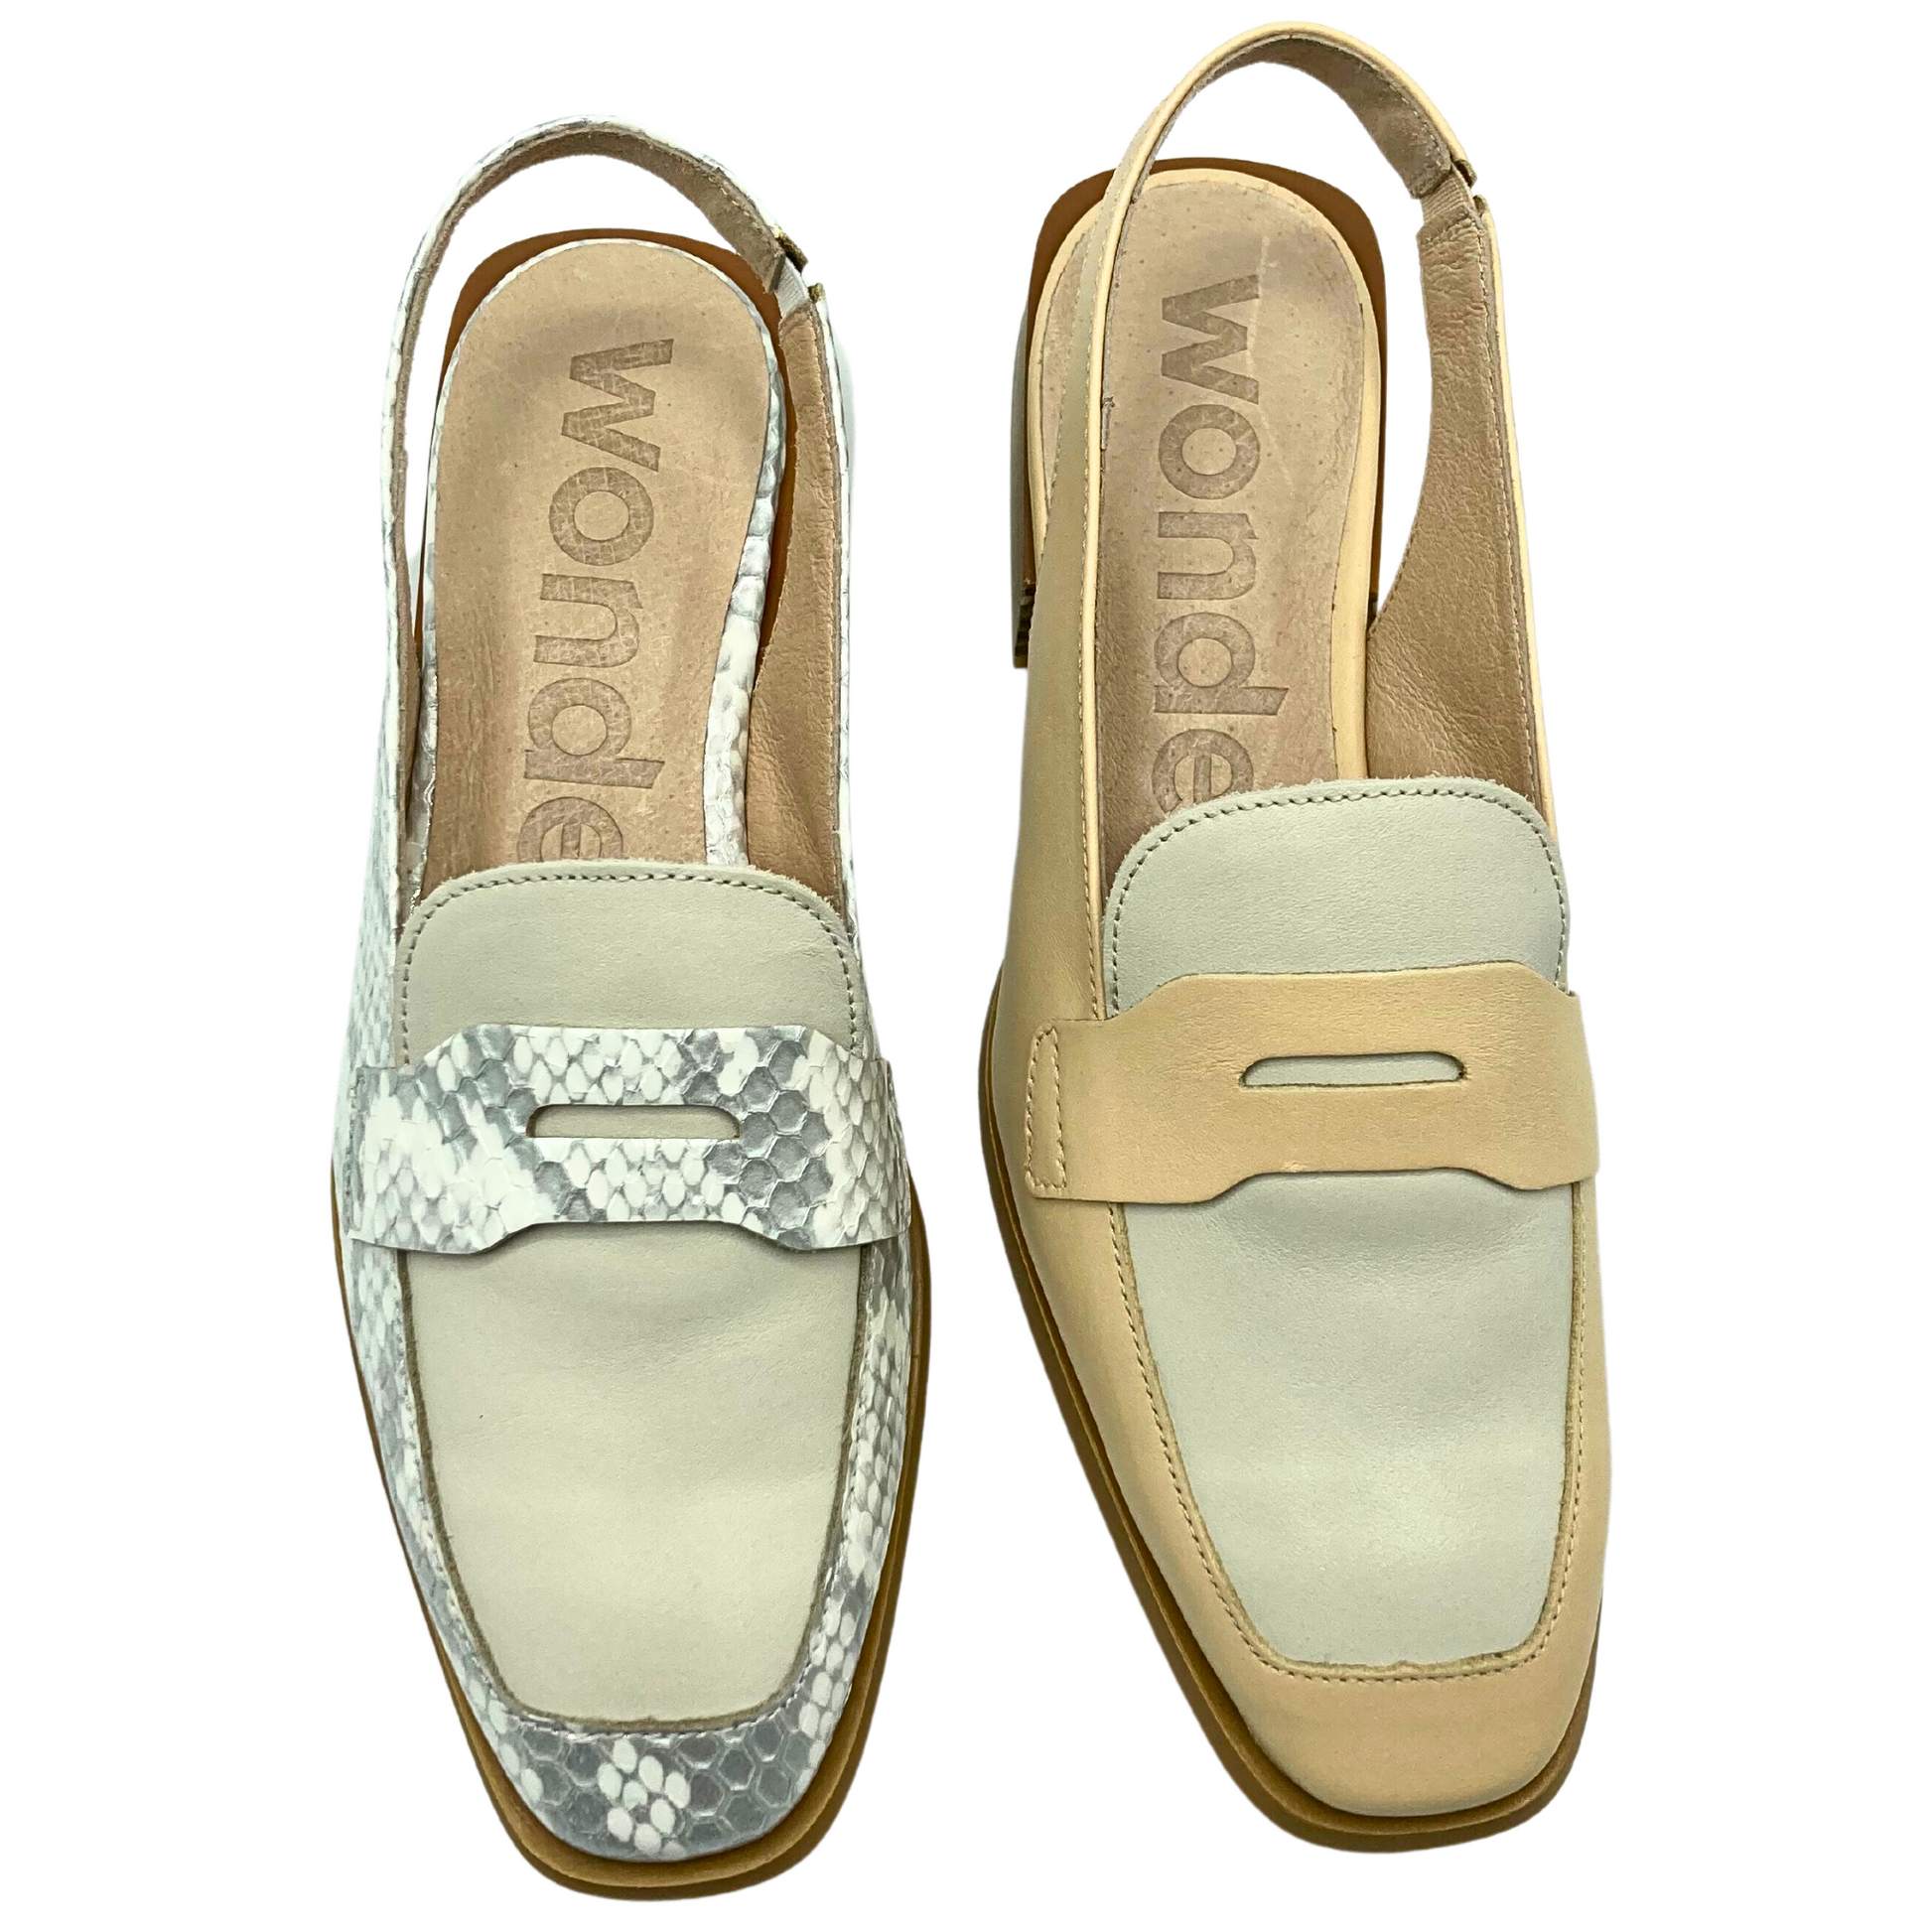 Top down view of a slip on slingback loafer in 2 colorways.  Cream/taupe and taupe/grey snake